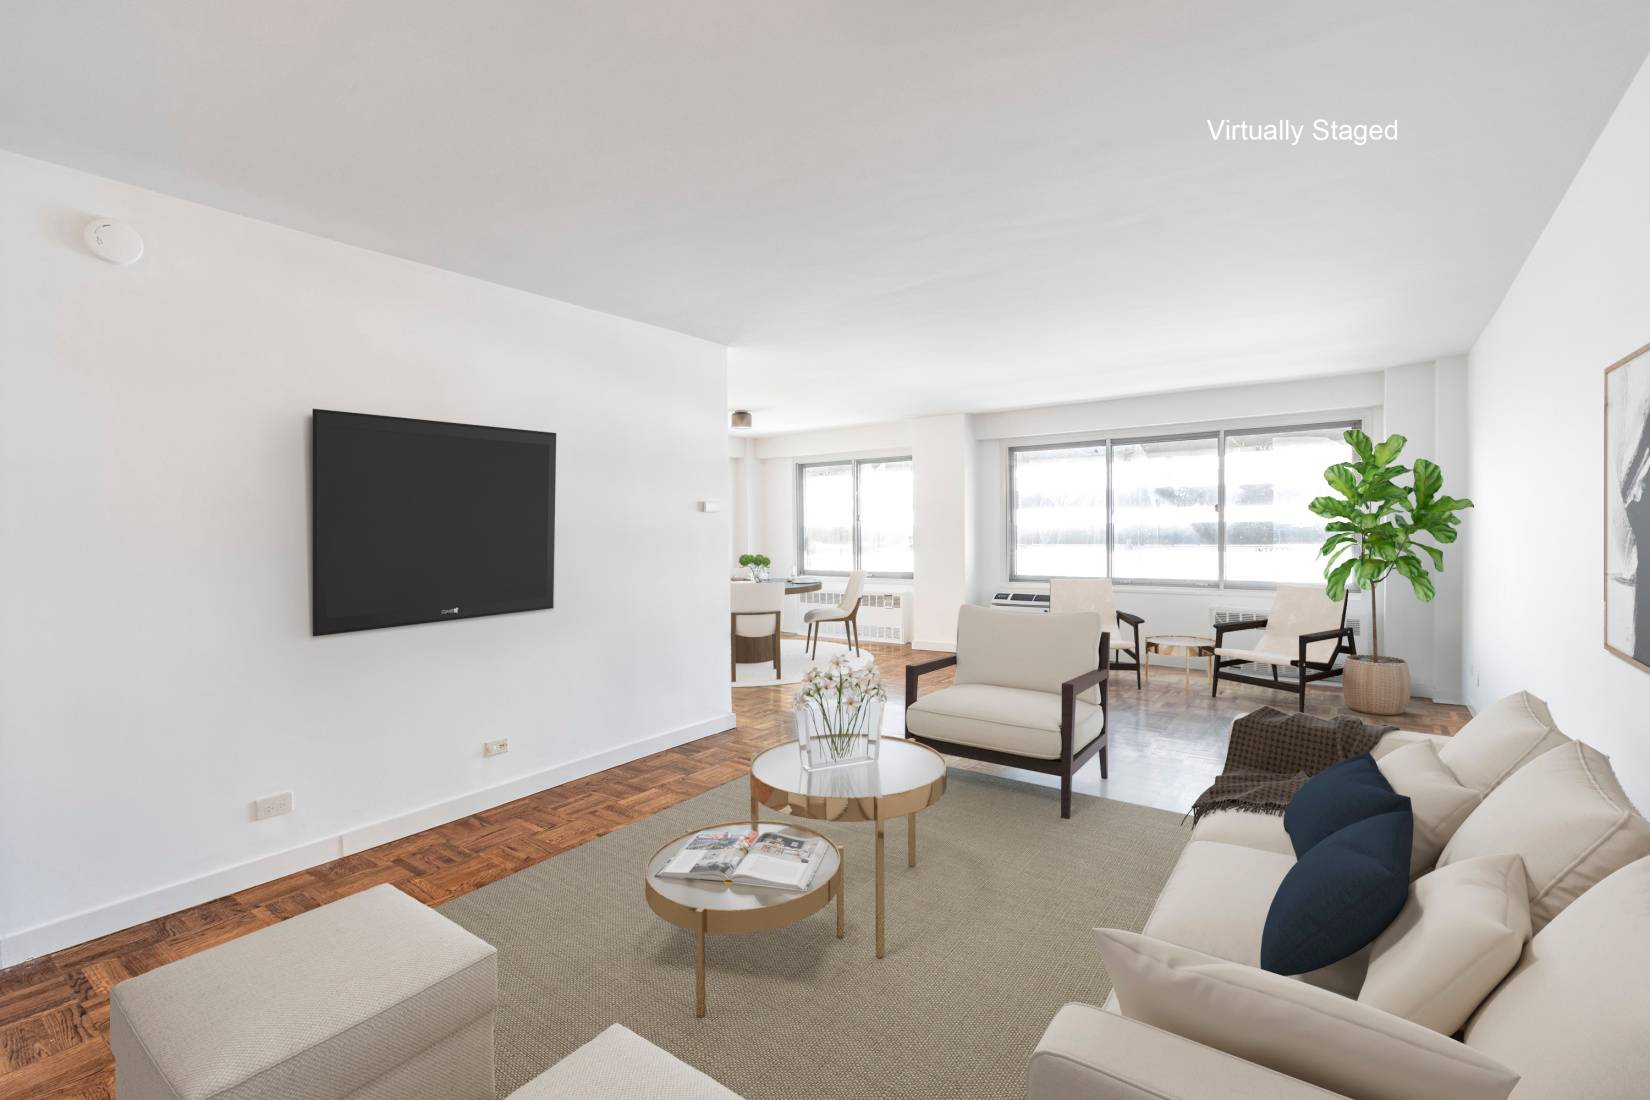 No Dogs allowed Minimum 1 Year lease Residence 10CD is a generously proportioned and bright 3 bedroom, 3 bath corner residence with an open living layout with views overlooking a ...